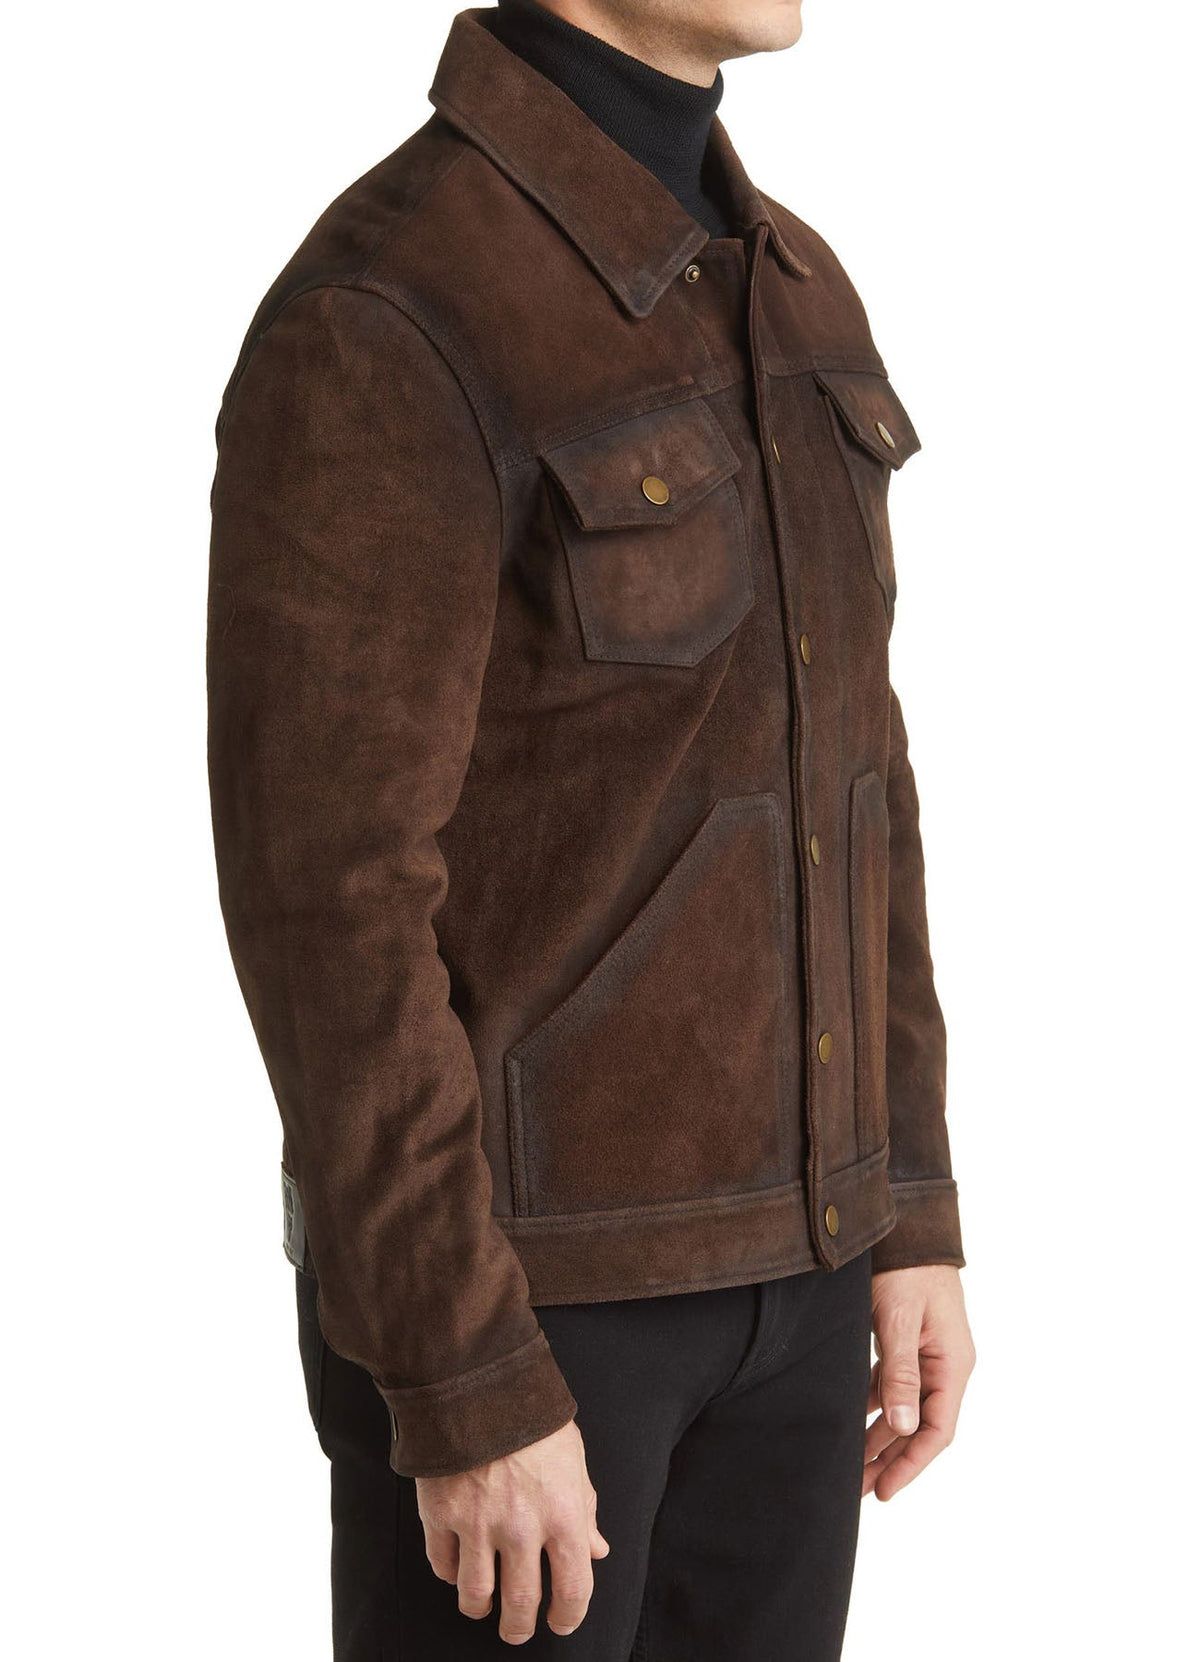 Mens Chocolate Brown Suede Leather Jacket